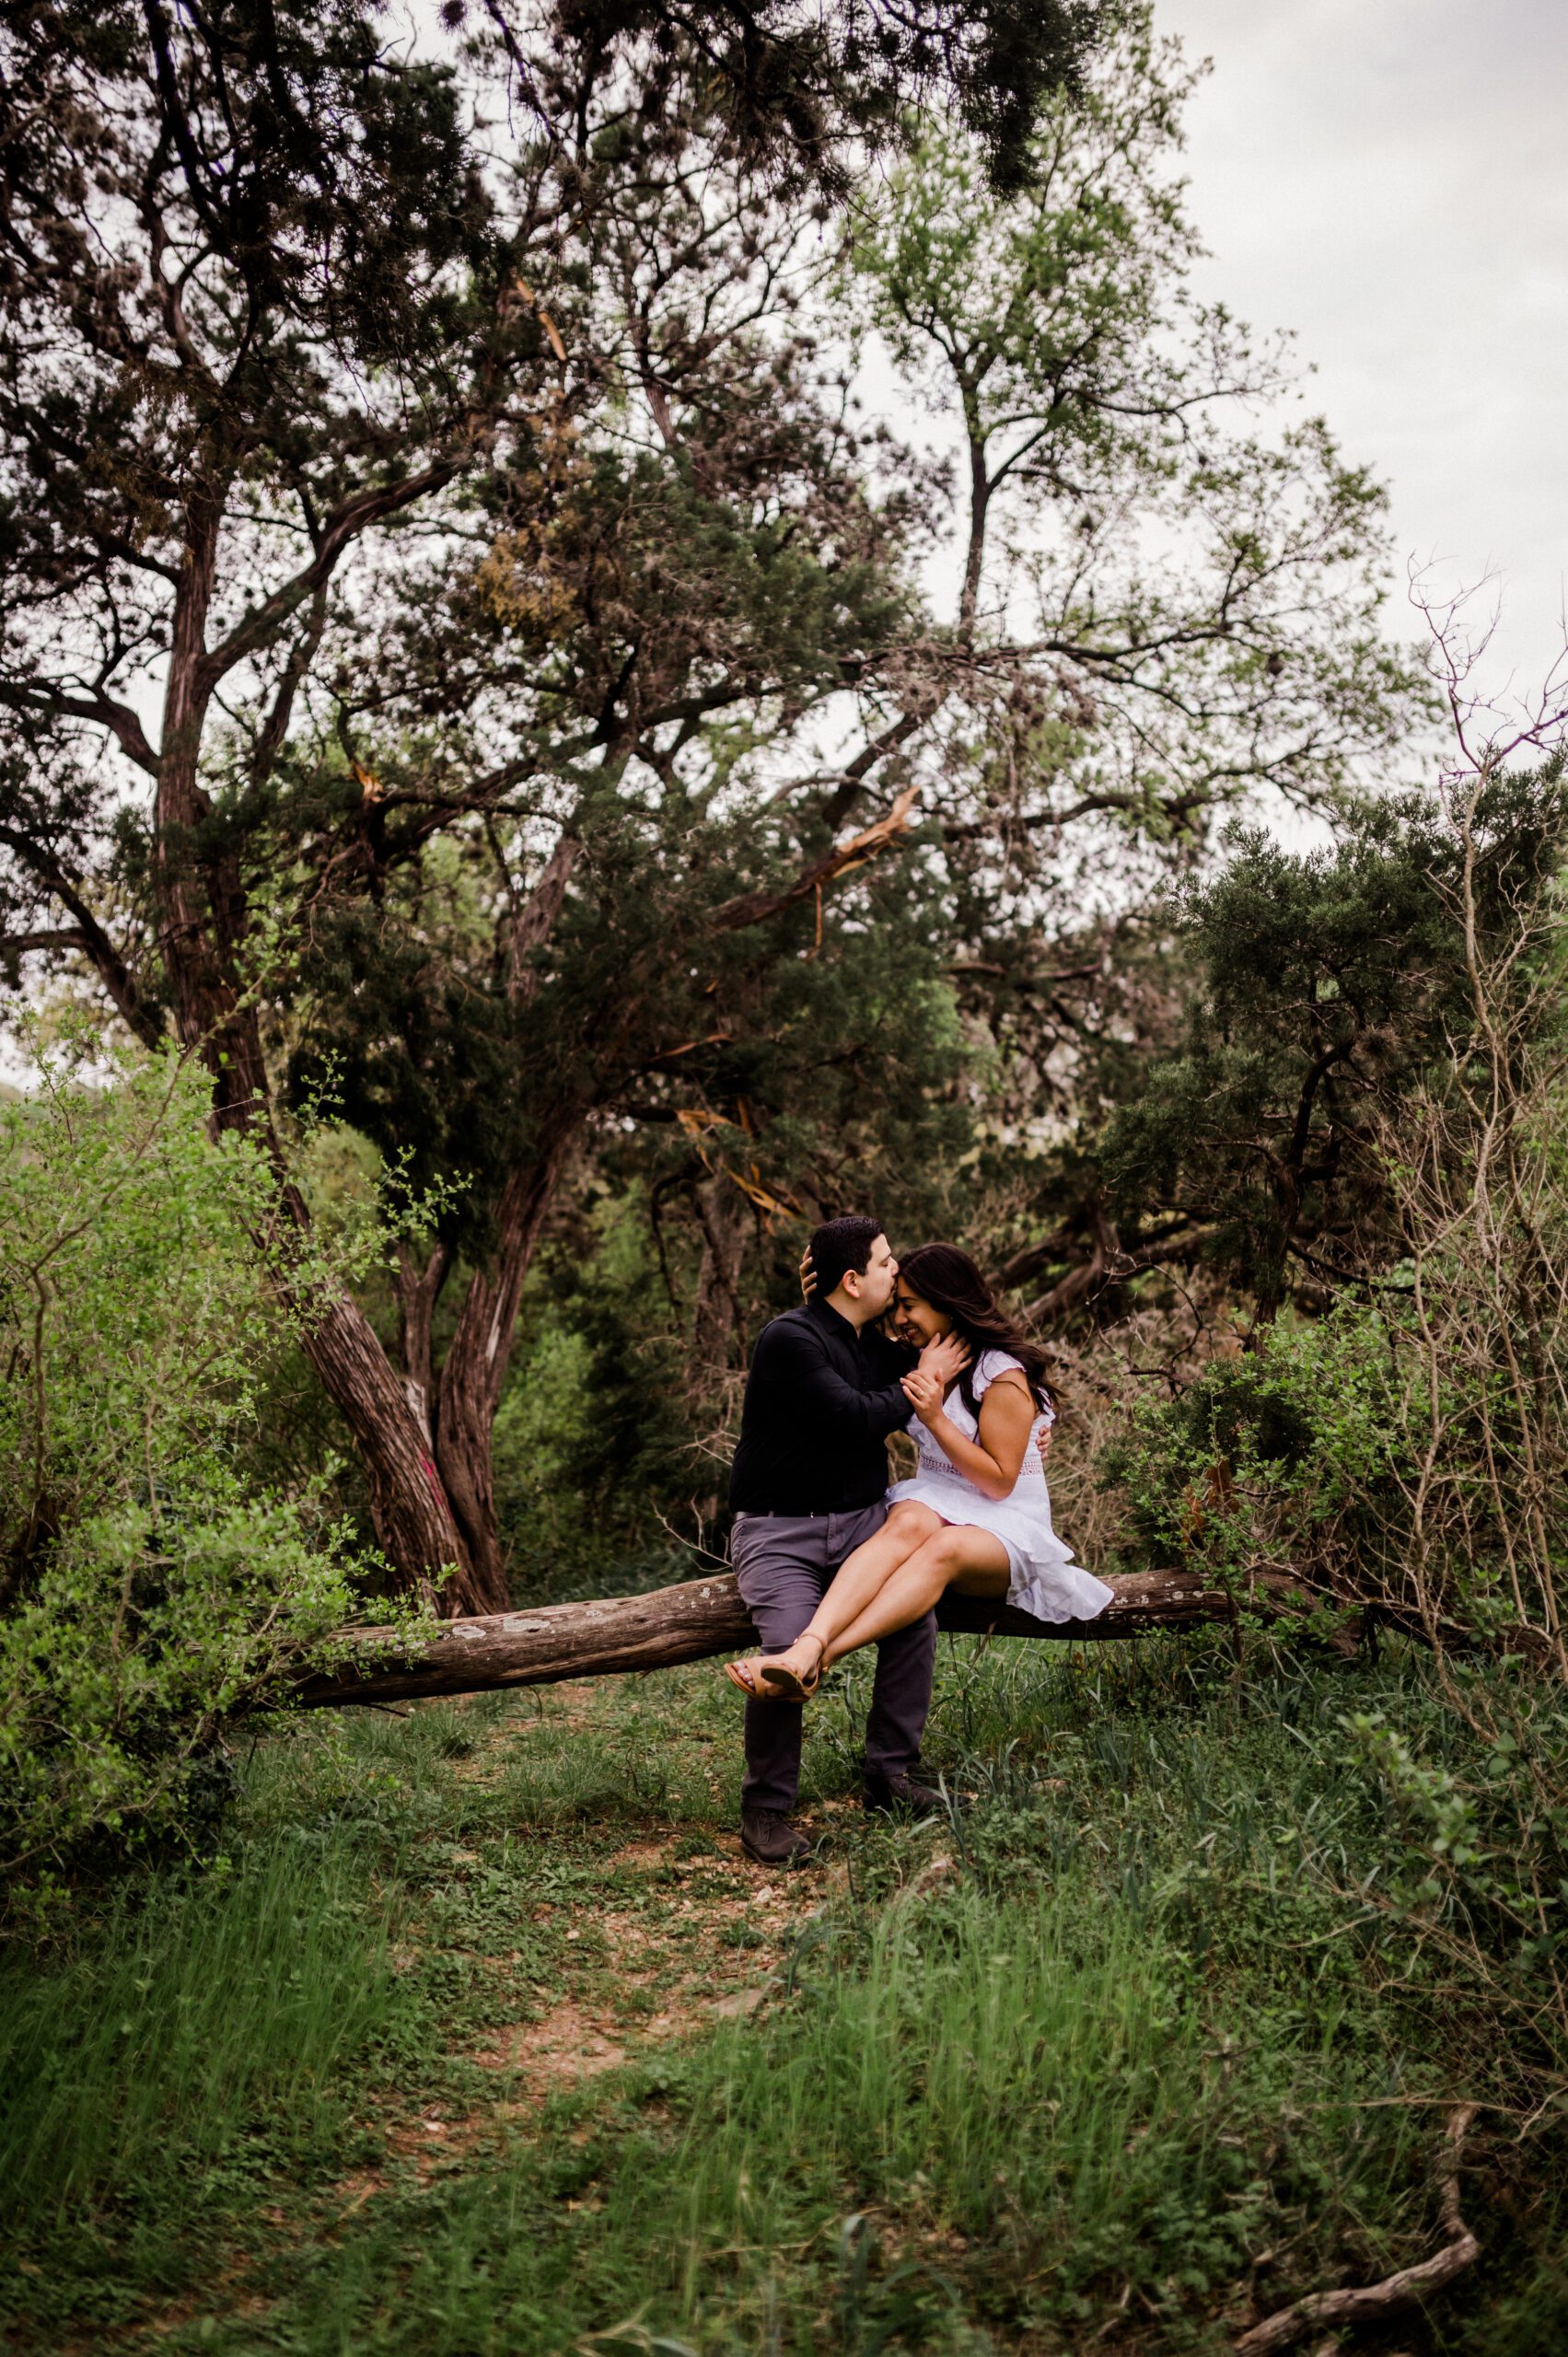 Monica &  Eduardo's Engagement Session at Barton Springs in Austin, Texas with Jericka of the RDP Team